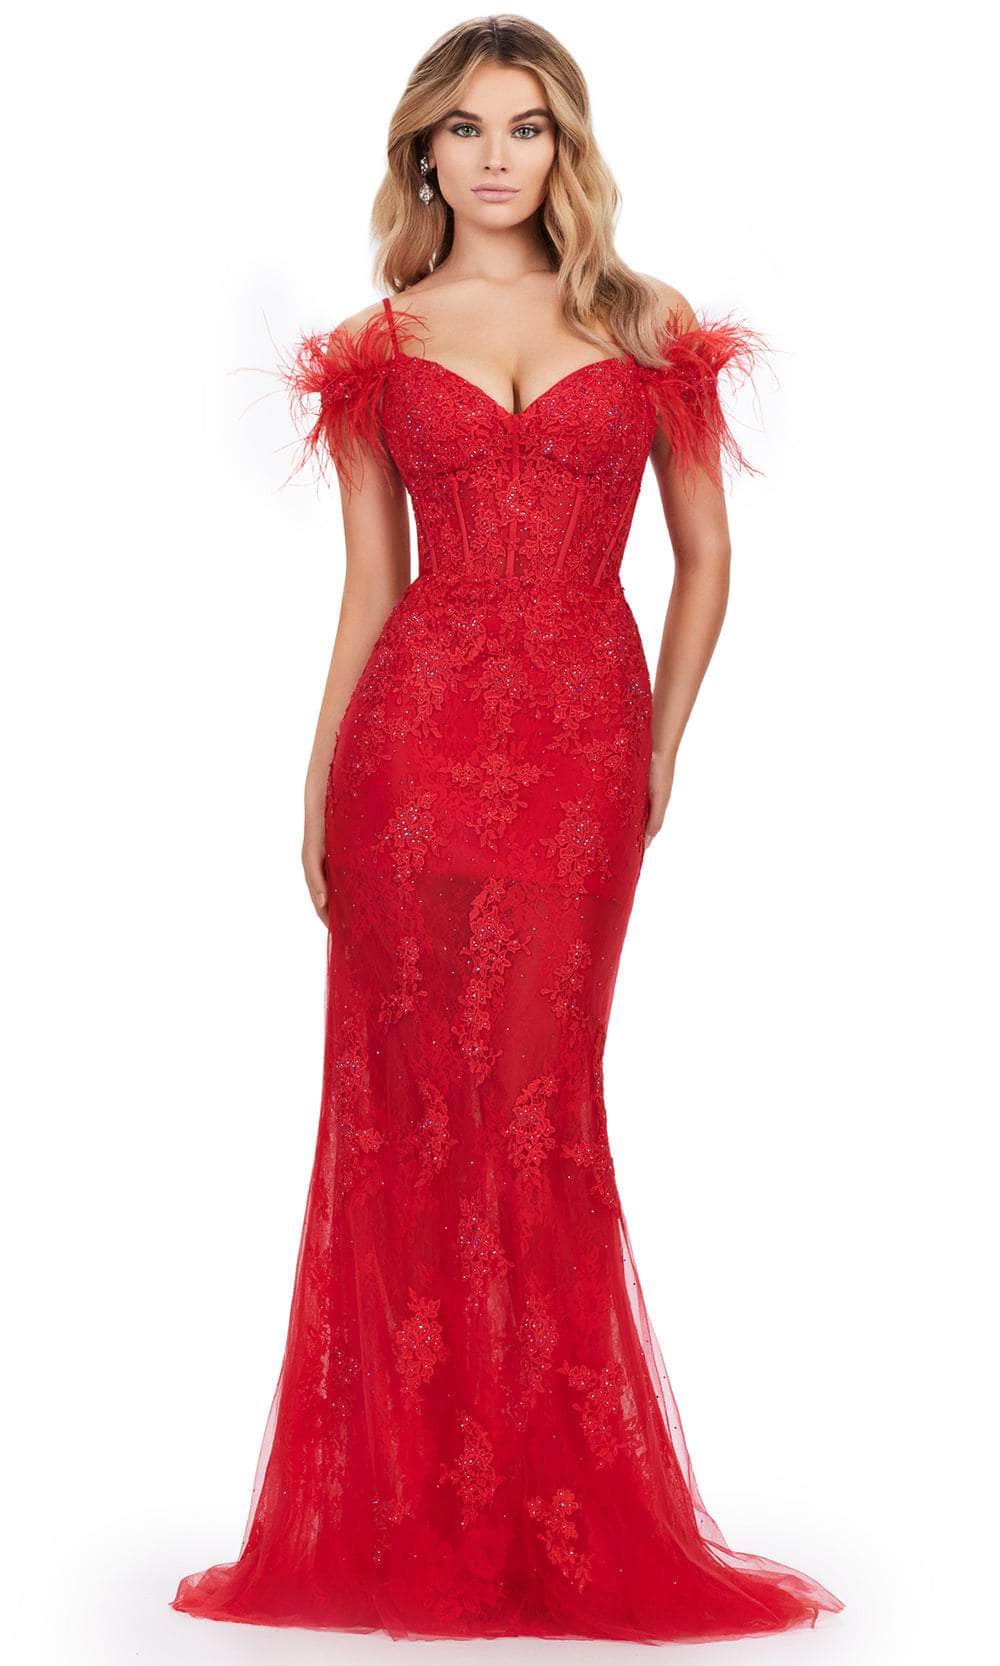 Ashley Lauren 11481 - Feather Sleeve Prom Dress 00 /  Red